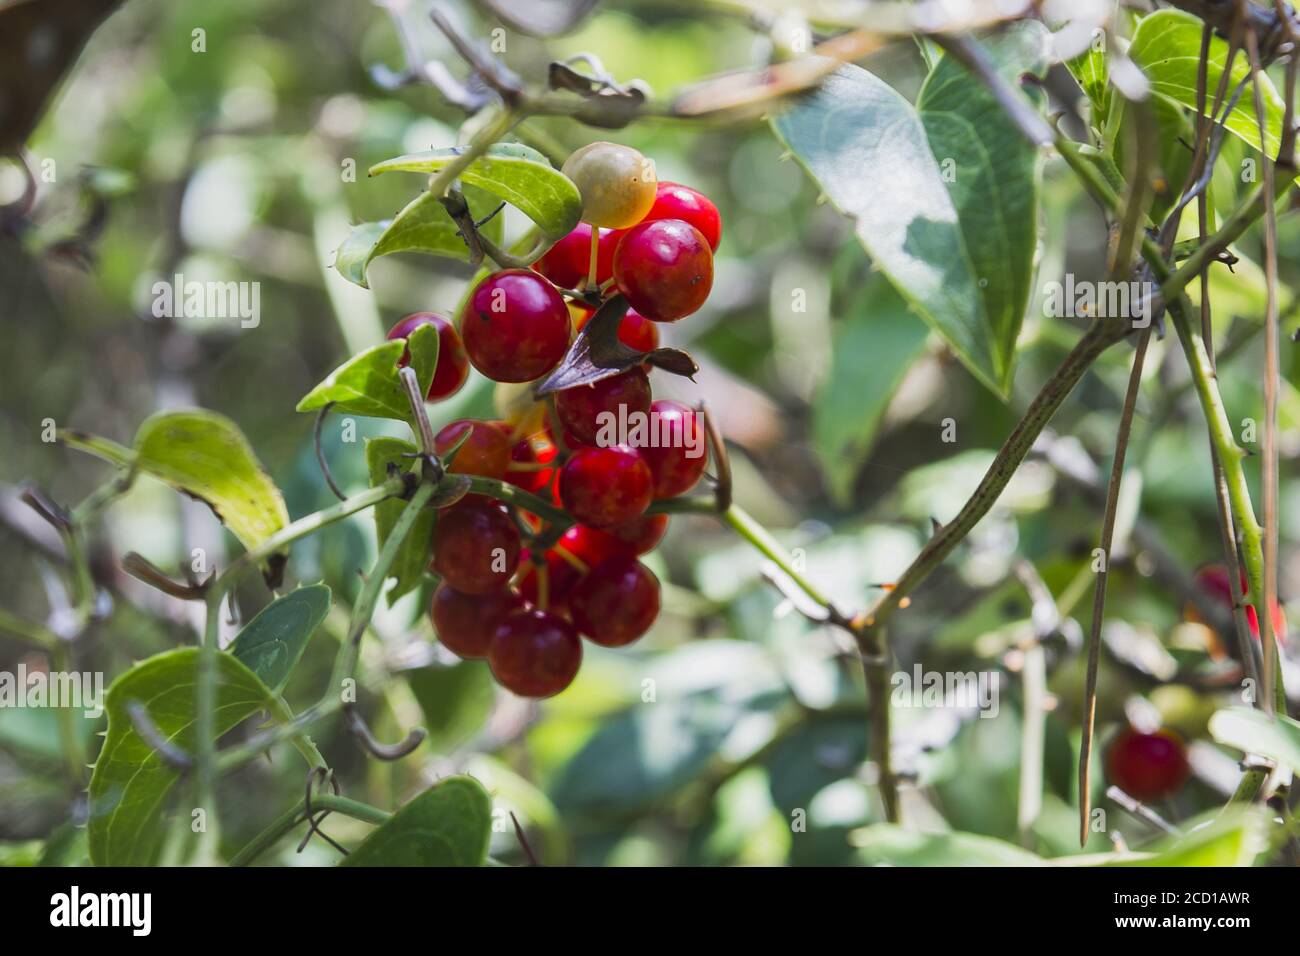 Selective focus shot of Smilax aspera plant with ripe berries Stock Photo